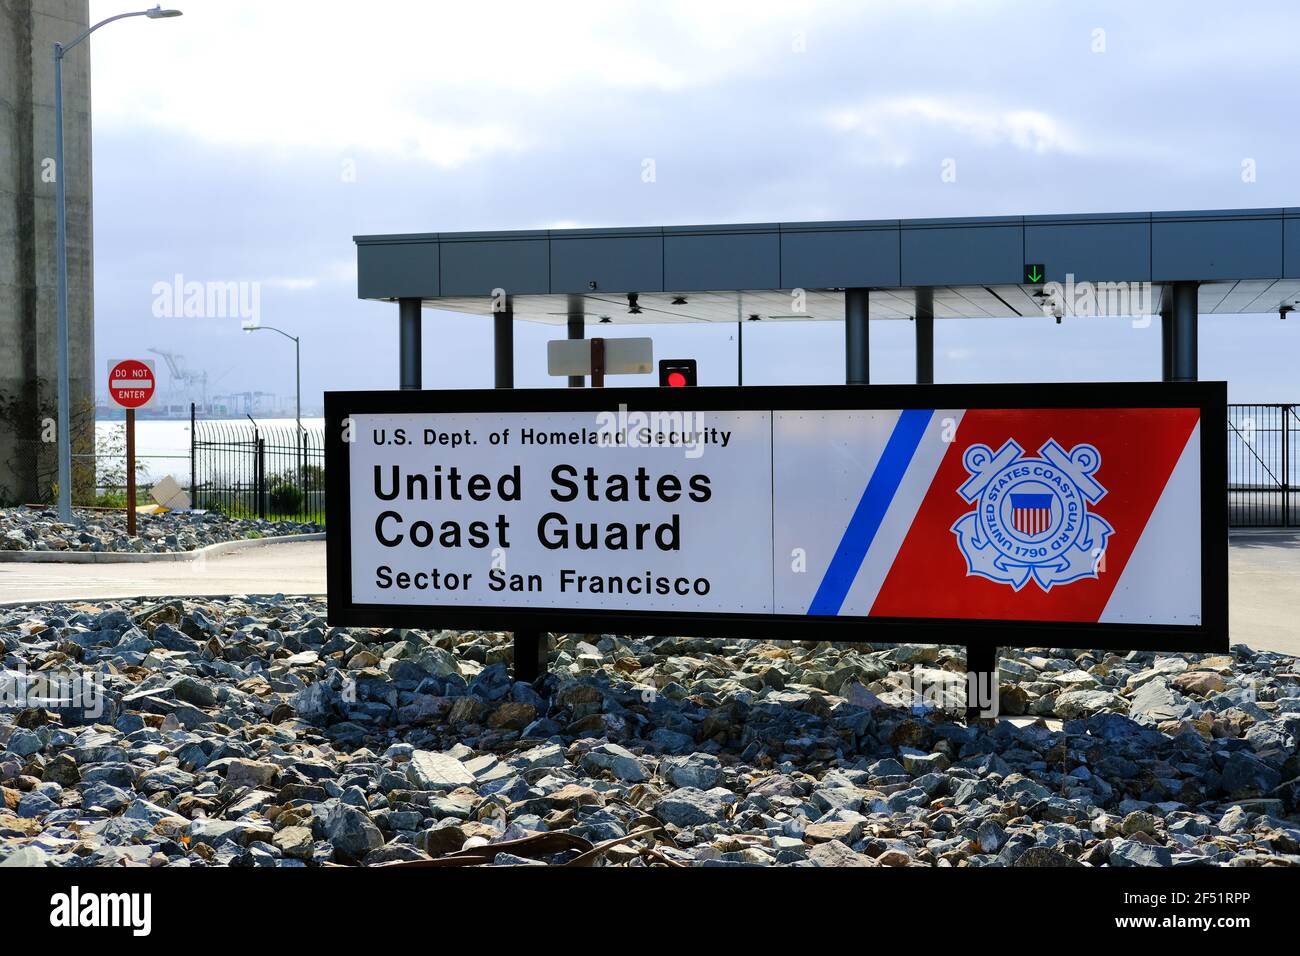 Gate Sign At The Entrance To The United States Coast Guard Sector San